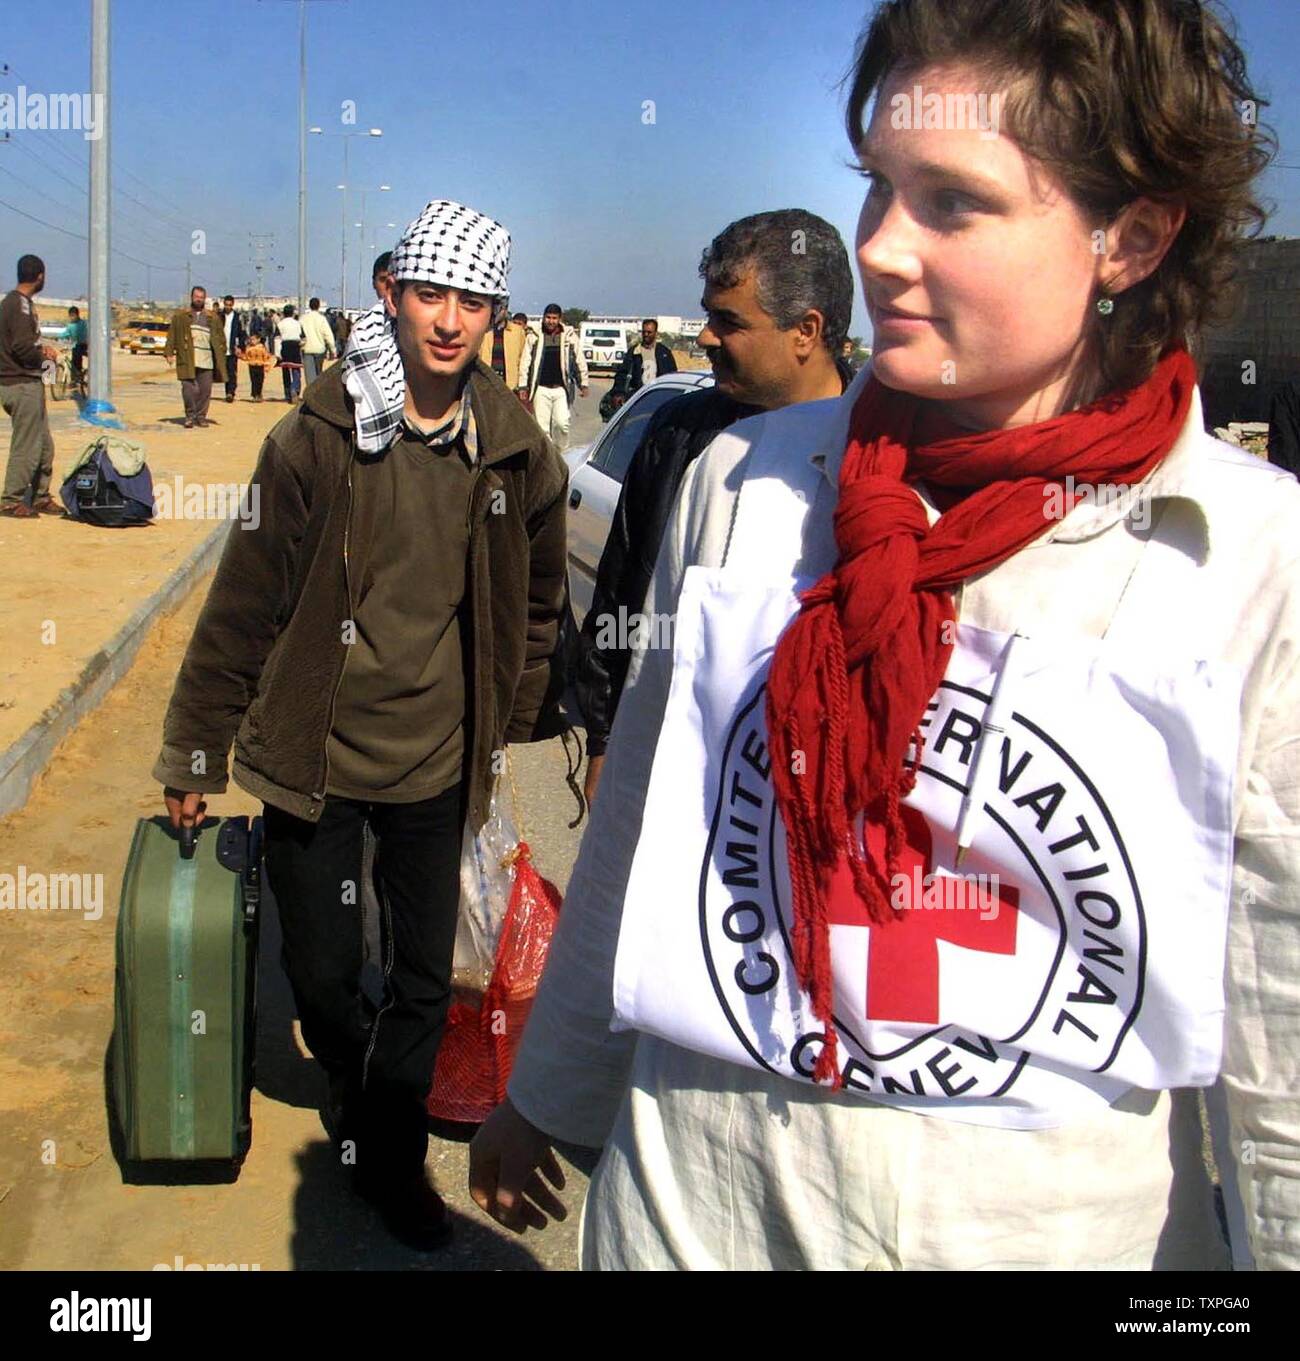 Palestinian prisoners  are greeted by relatives and members of the Red Cross after being released by authorities from an Israeli jail, at the Erez Crossing, northern Gaza Strip on January 29, 2004. Israel released 400 Palestinian prisoners Thursday as part of a swap with Lebanese guerrilla group Hezbollah. Jubilant relatives greeted the freed prisoners at checkpoints Gaza Strip with cheers of thanks to Hezbollah.  (UPI photo/Ismail Mohamad) Stock Photo